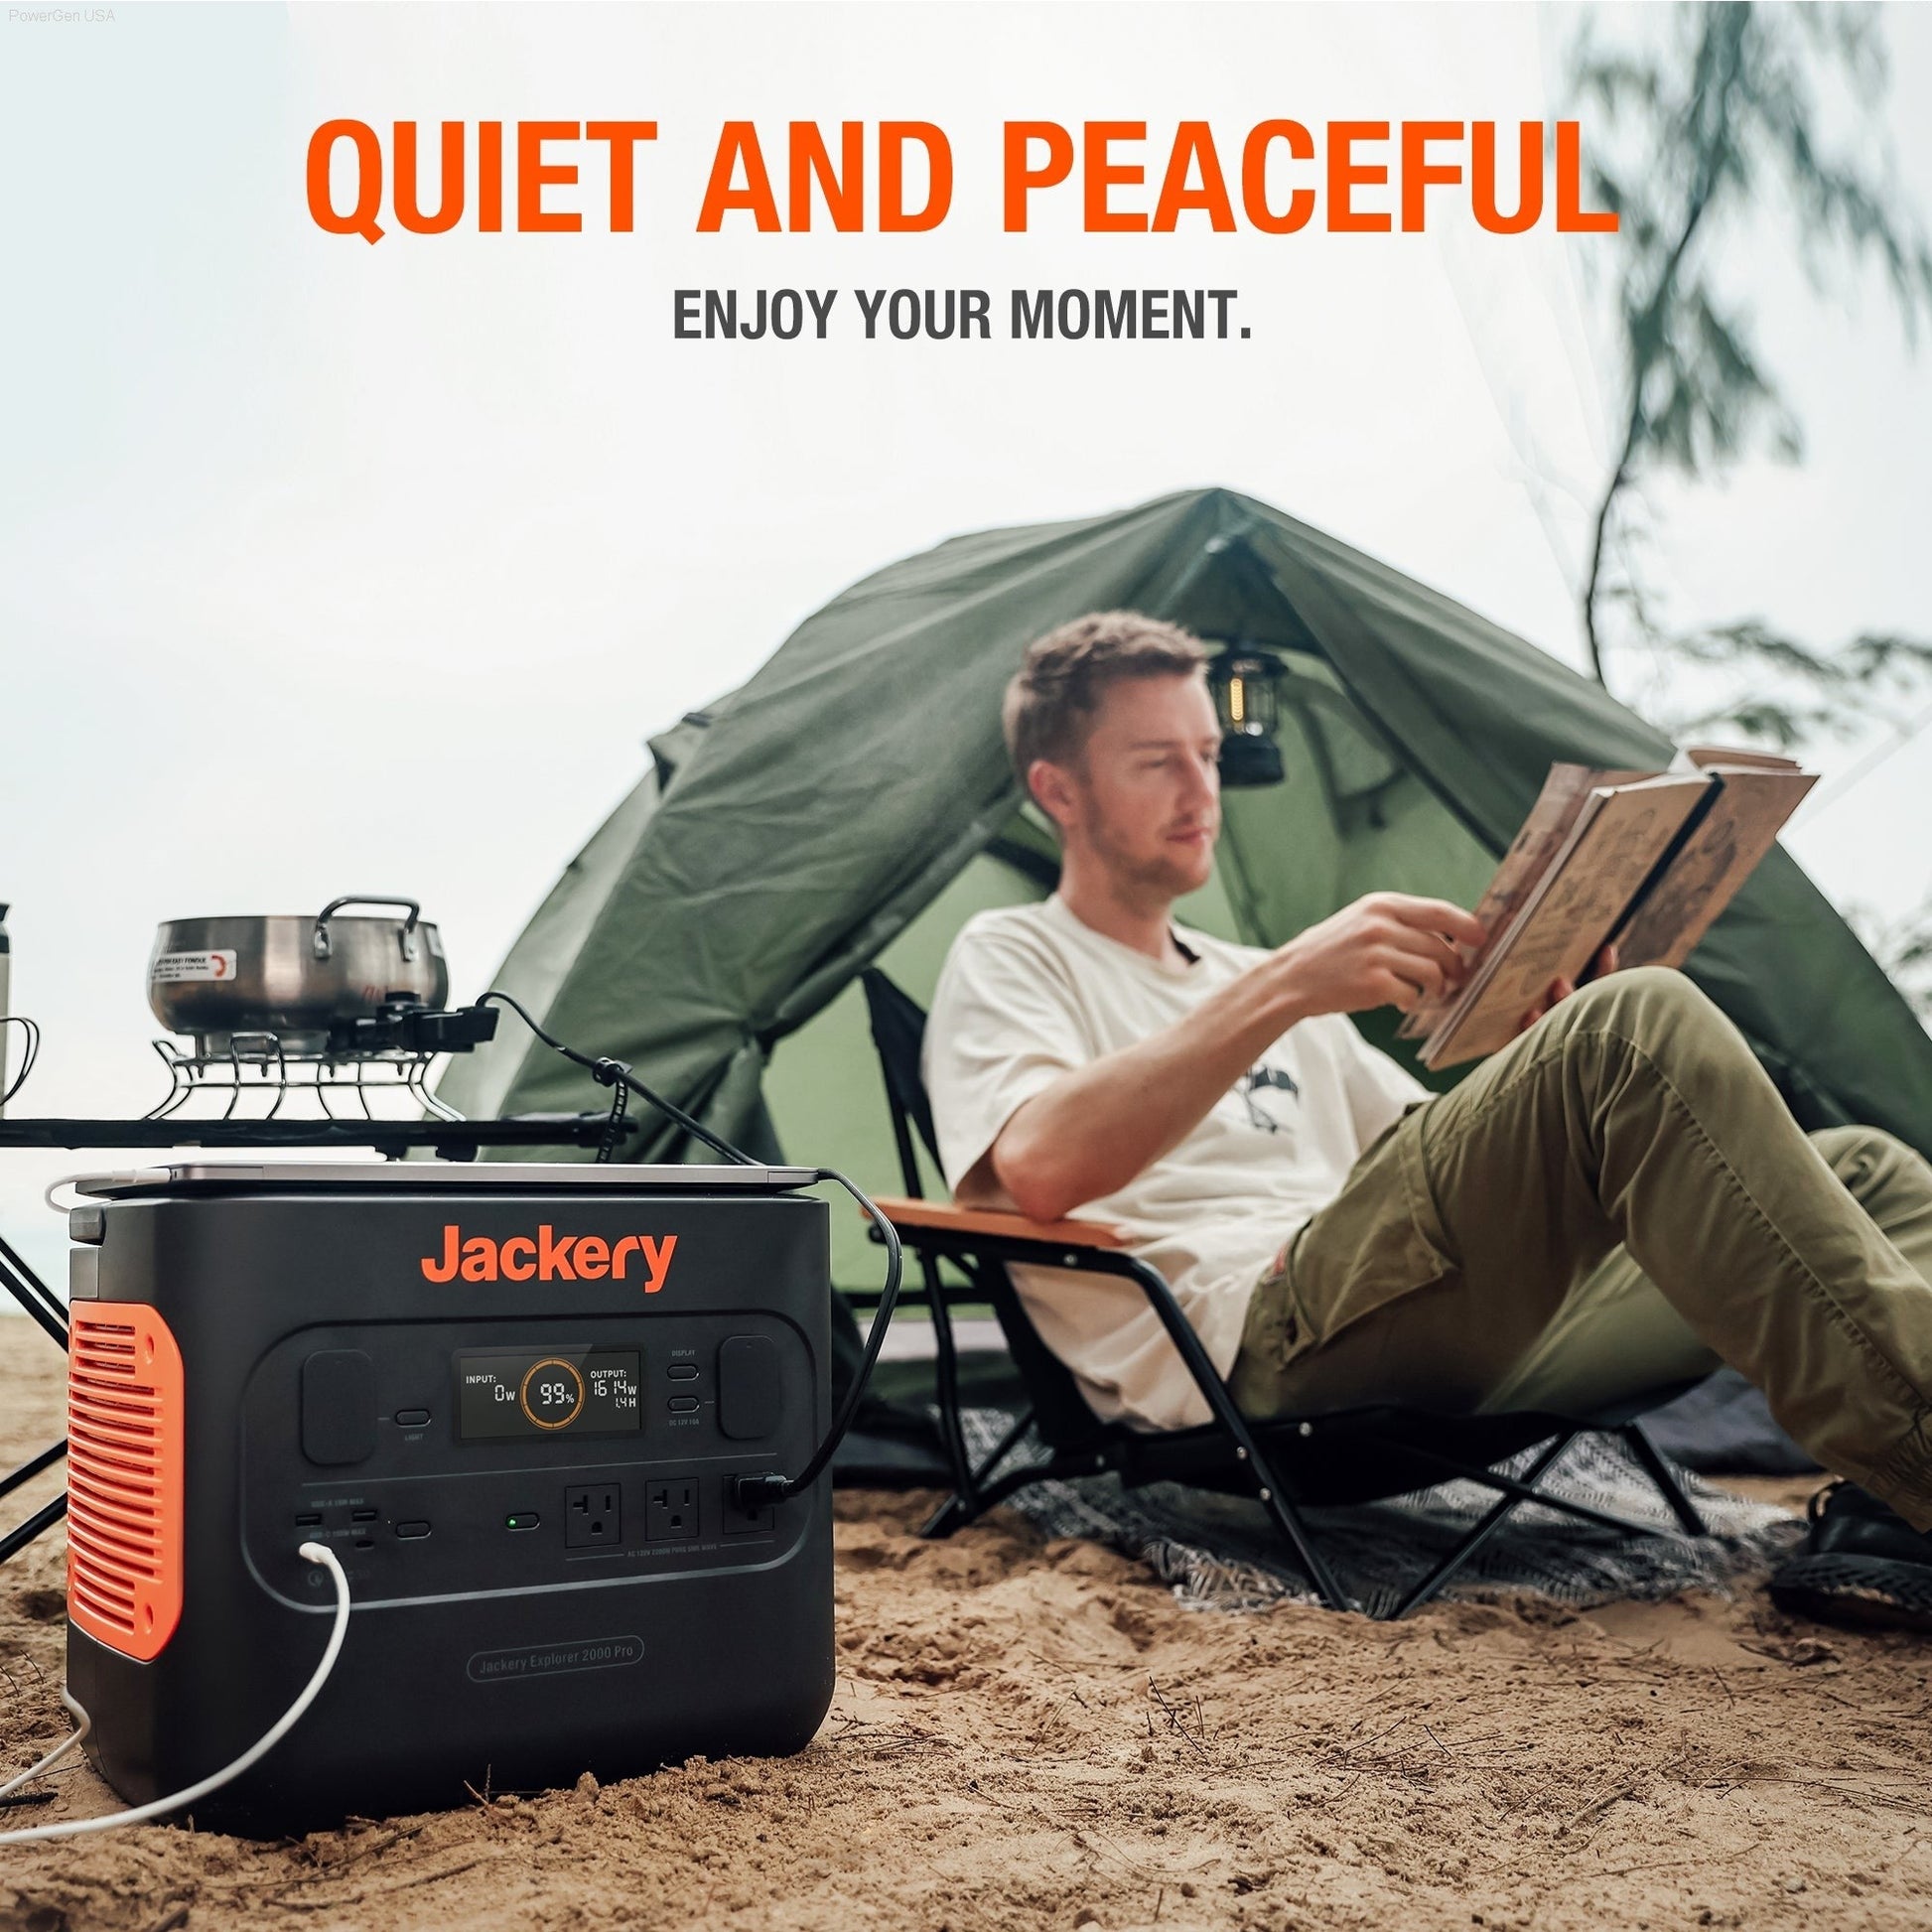 Solar & Battery Powered - Jackery Explorer 2000 Pro - 2160 Wh Portable Power Station For Outdoors